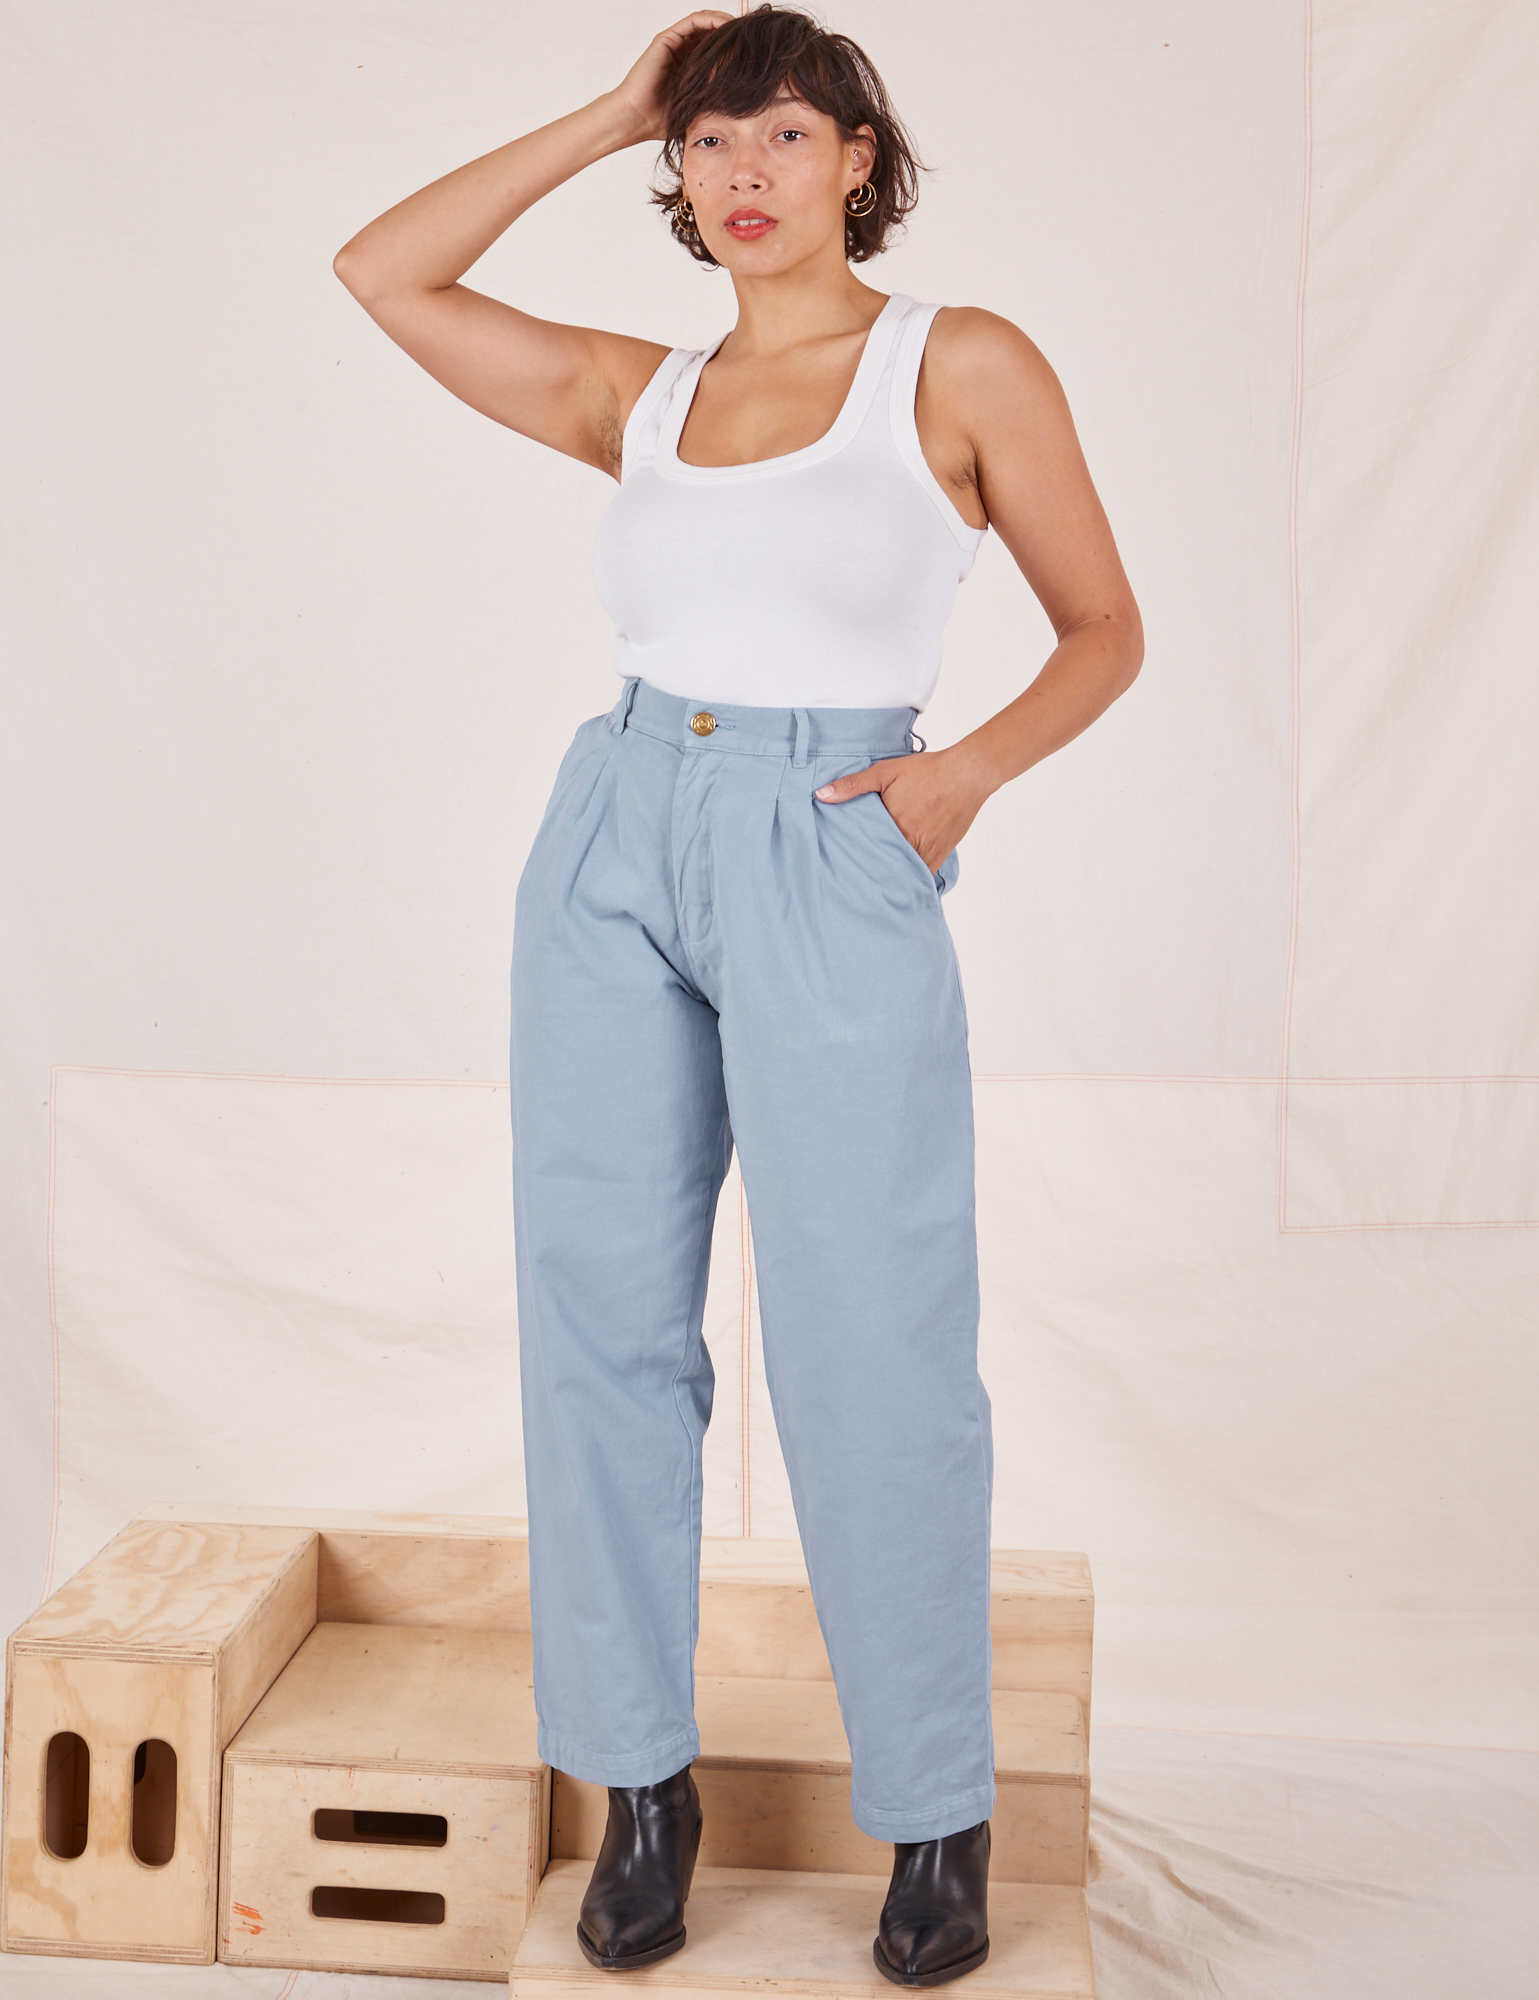 Tiara is 5&#39;4&quot; and wearing XS Heavyweight Trousers in Periwinkle paired with vintage off-white Cropped Tank Top